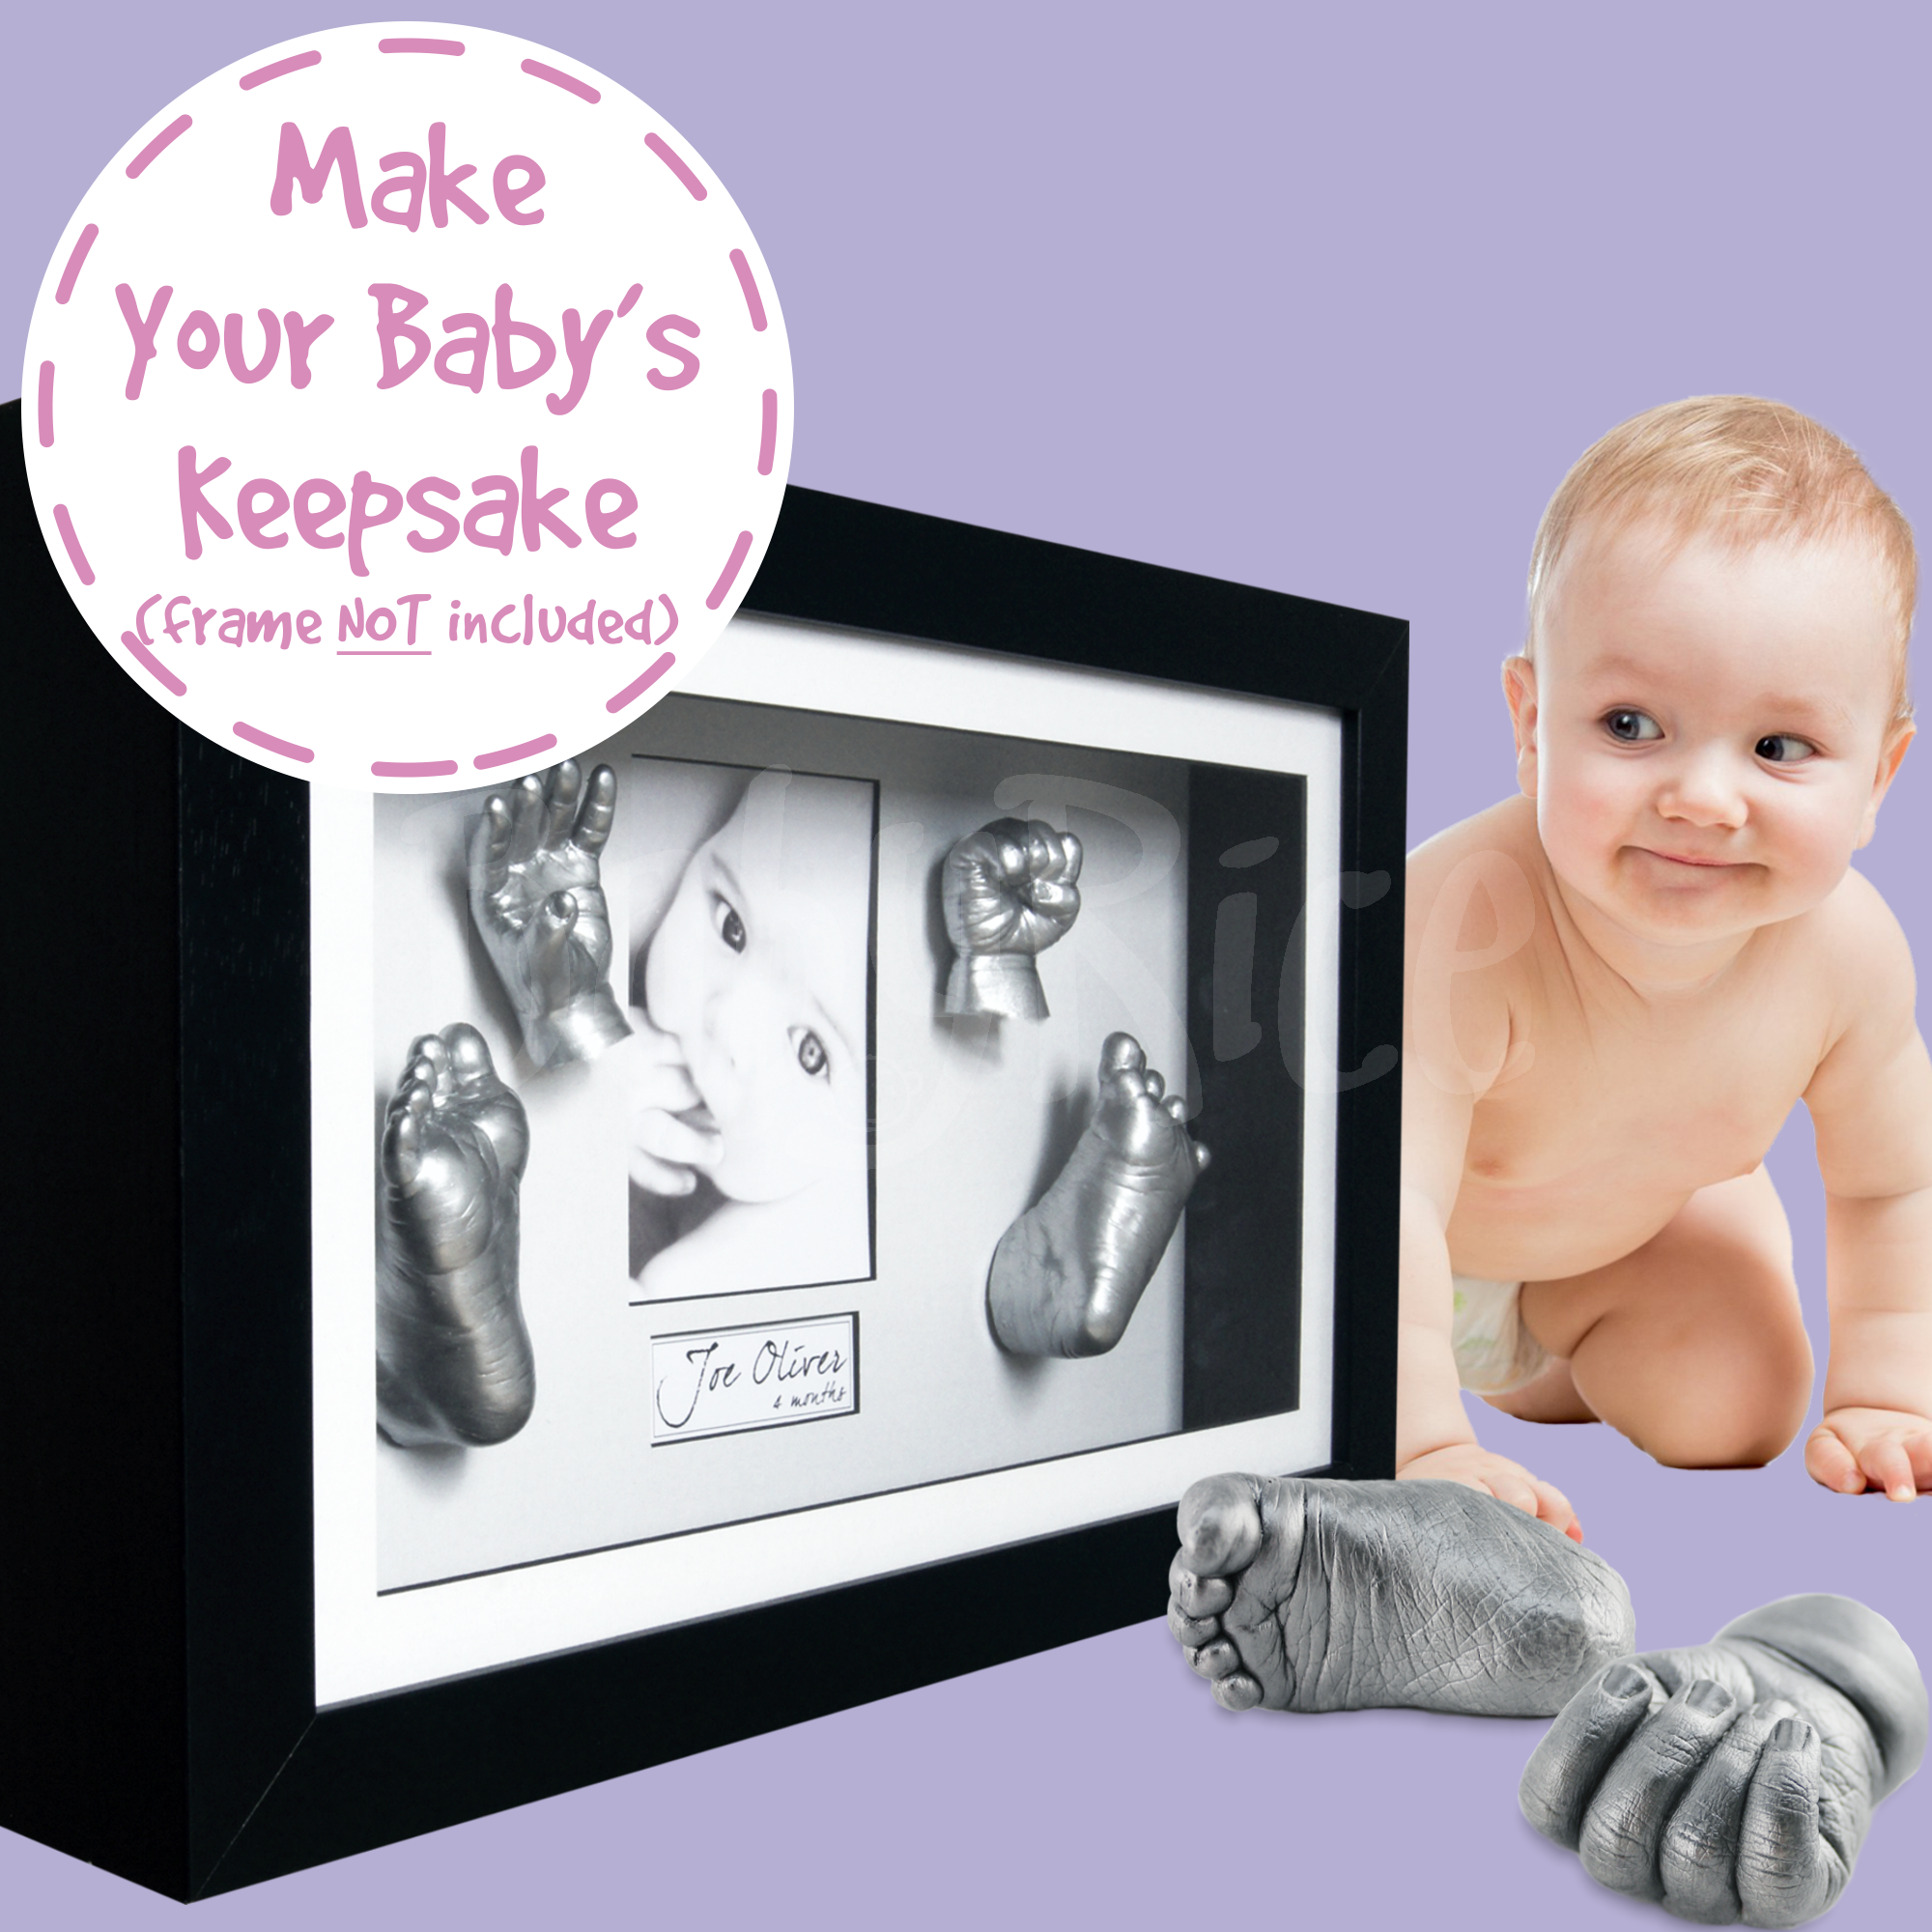  BabyRice Large Baby Casting Kit (great for Twins!), 14.5x8.5  White Frame, Black mount, Silver metallic paint : Baby